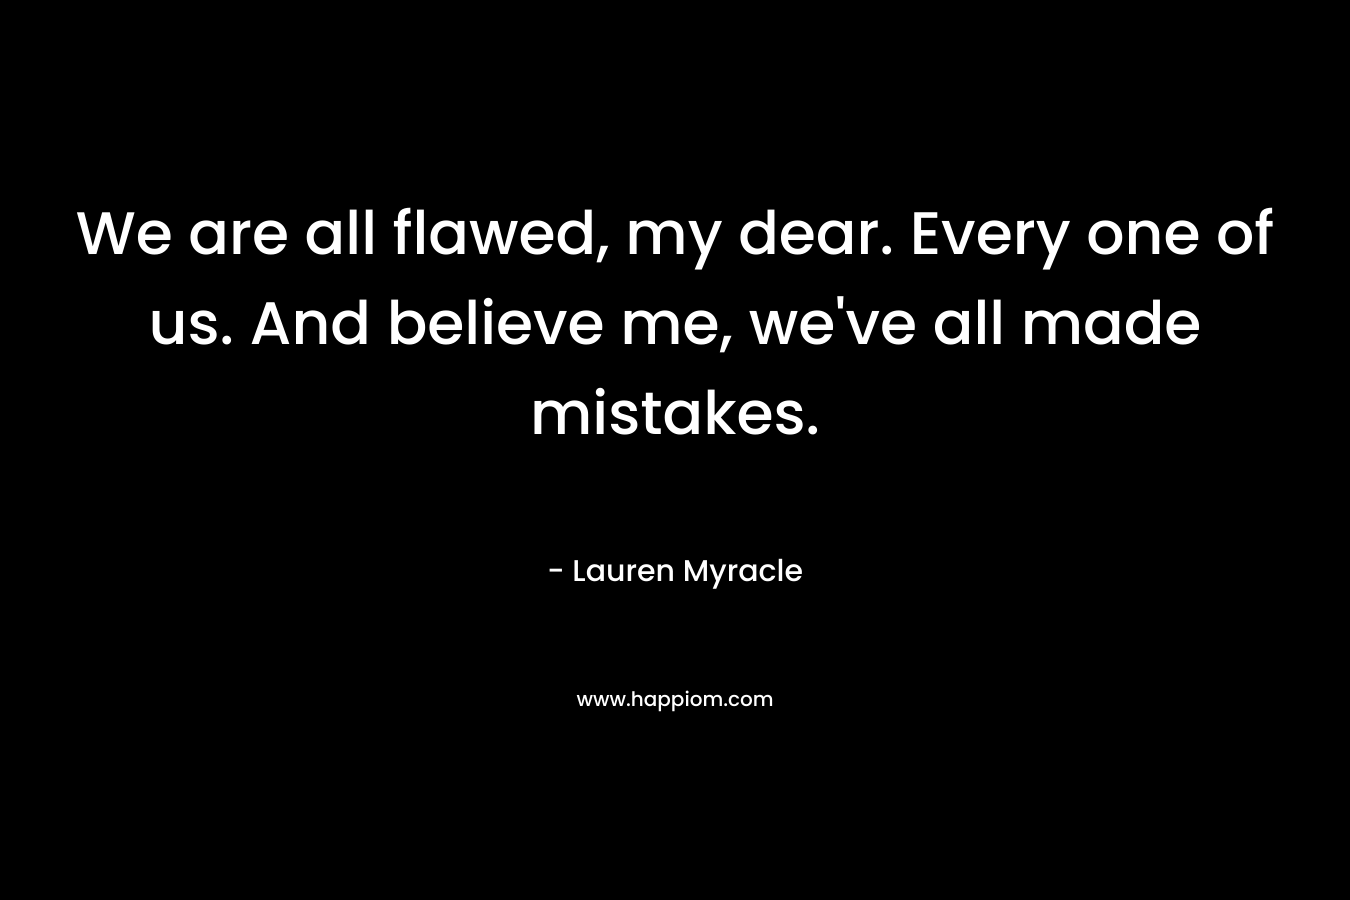 We are all flawed, my dear. Every one of us. And believe me, we’ve all made mistakes. – Lauren Myracle